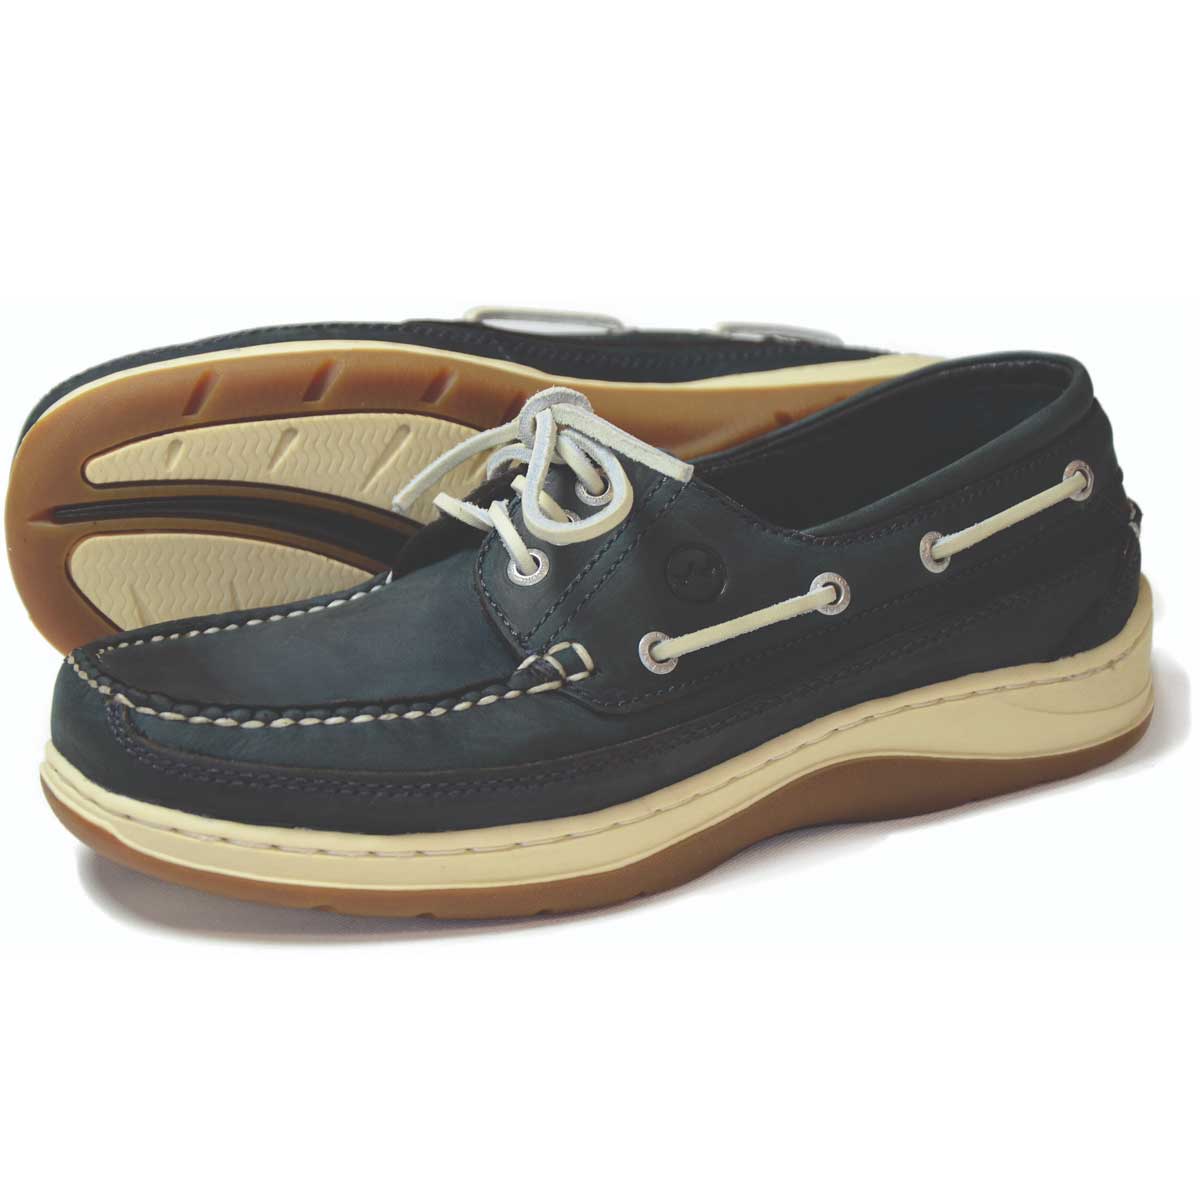 ORCA BAY Mens Squamish Performance Deck Shoes - Navy